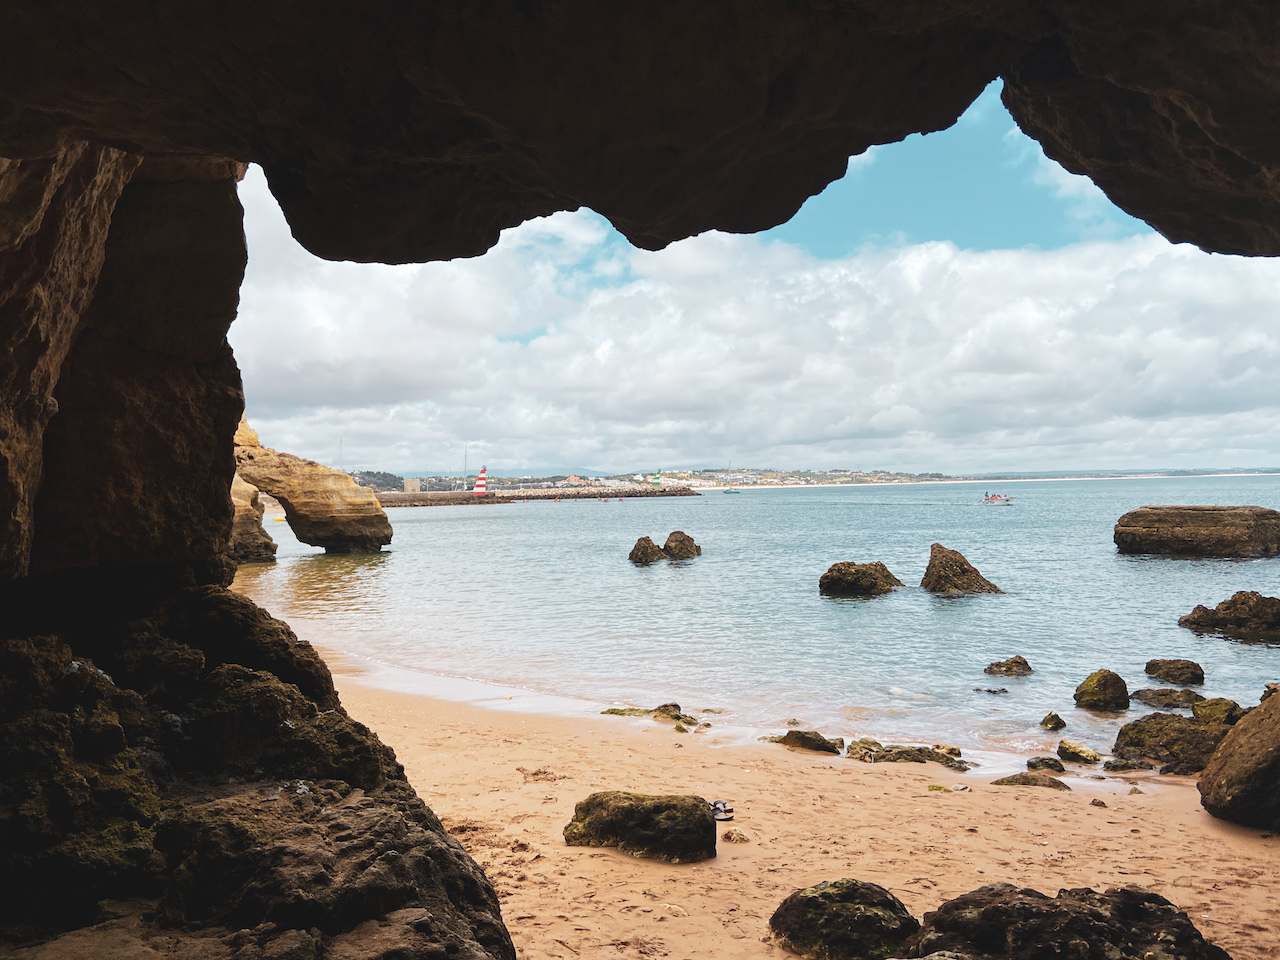 Beach in Lagos, Portugal. 10 Best Destinations in Europe for a Beach Holiday.